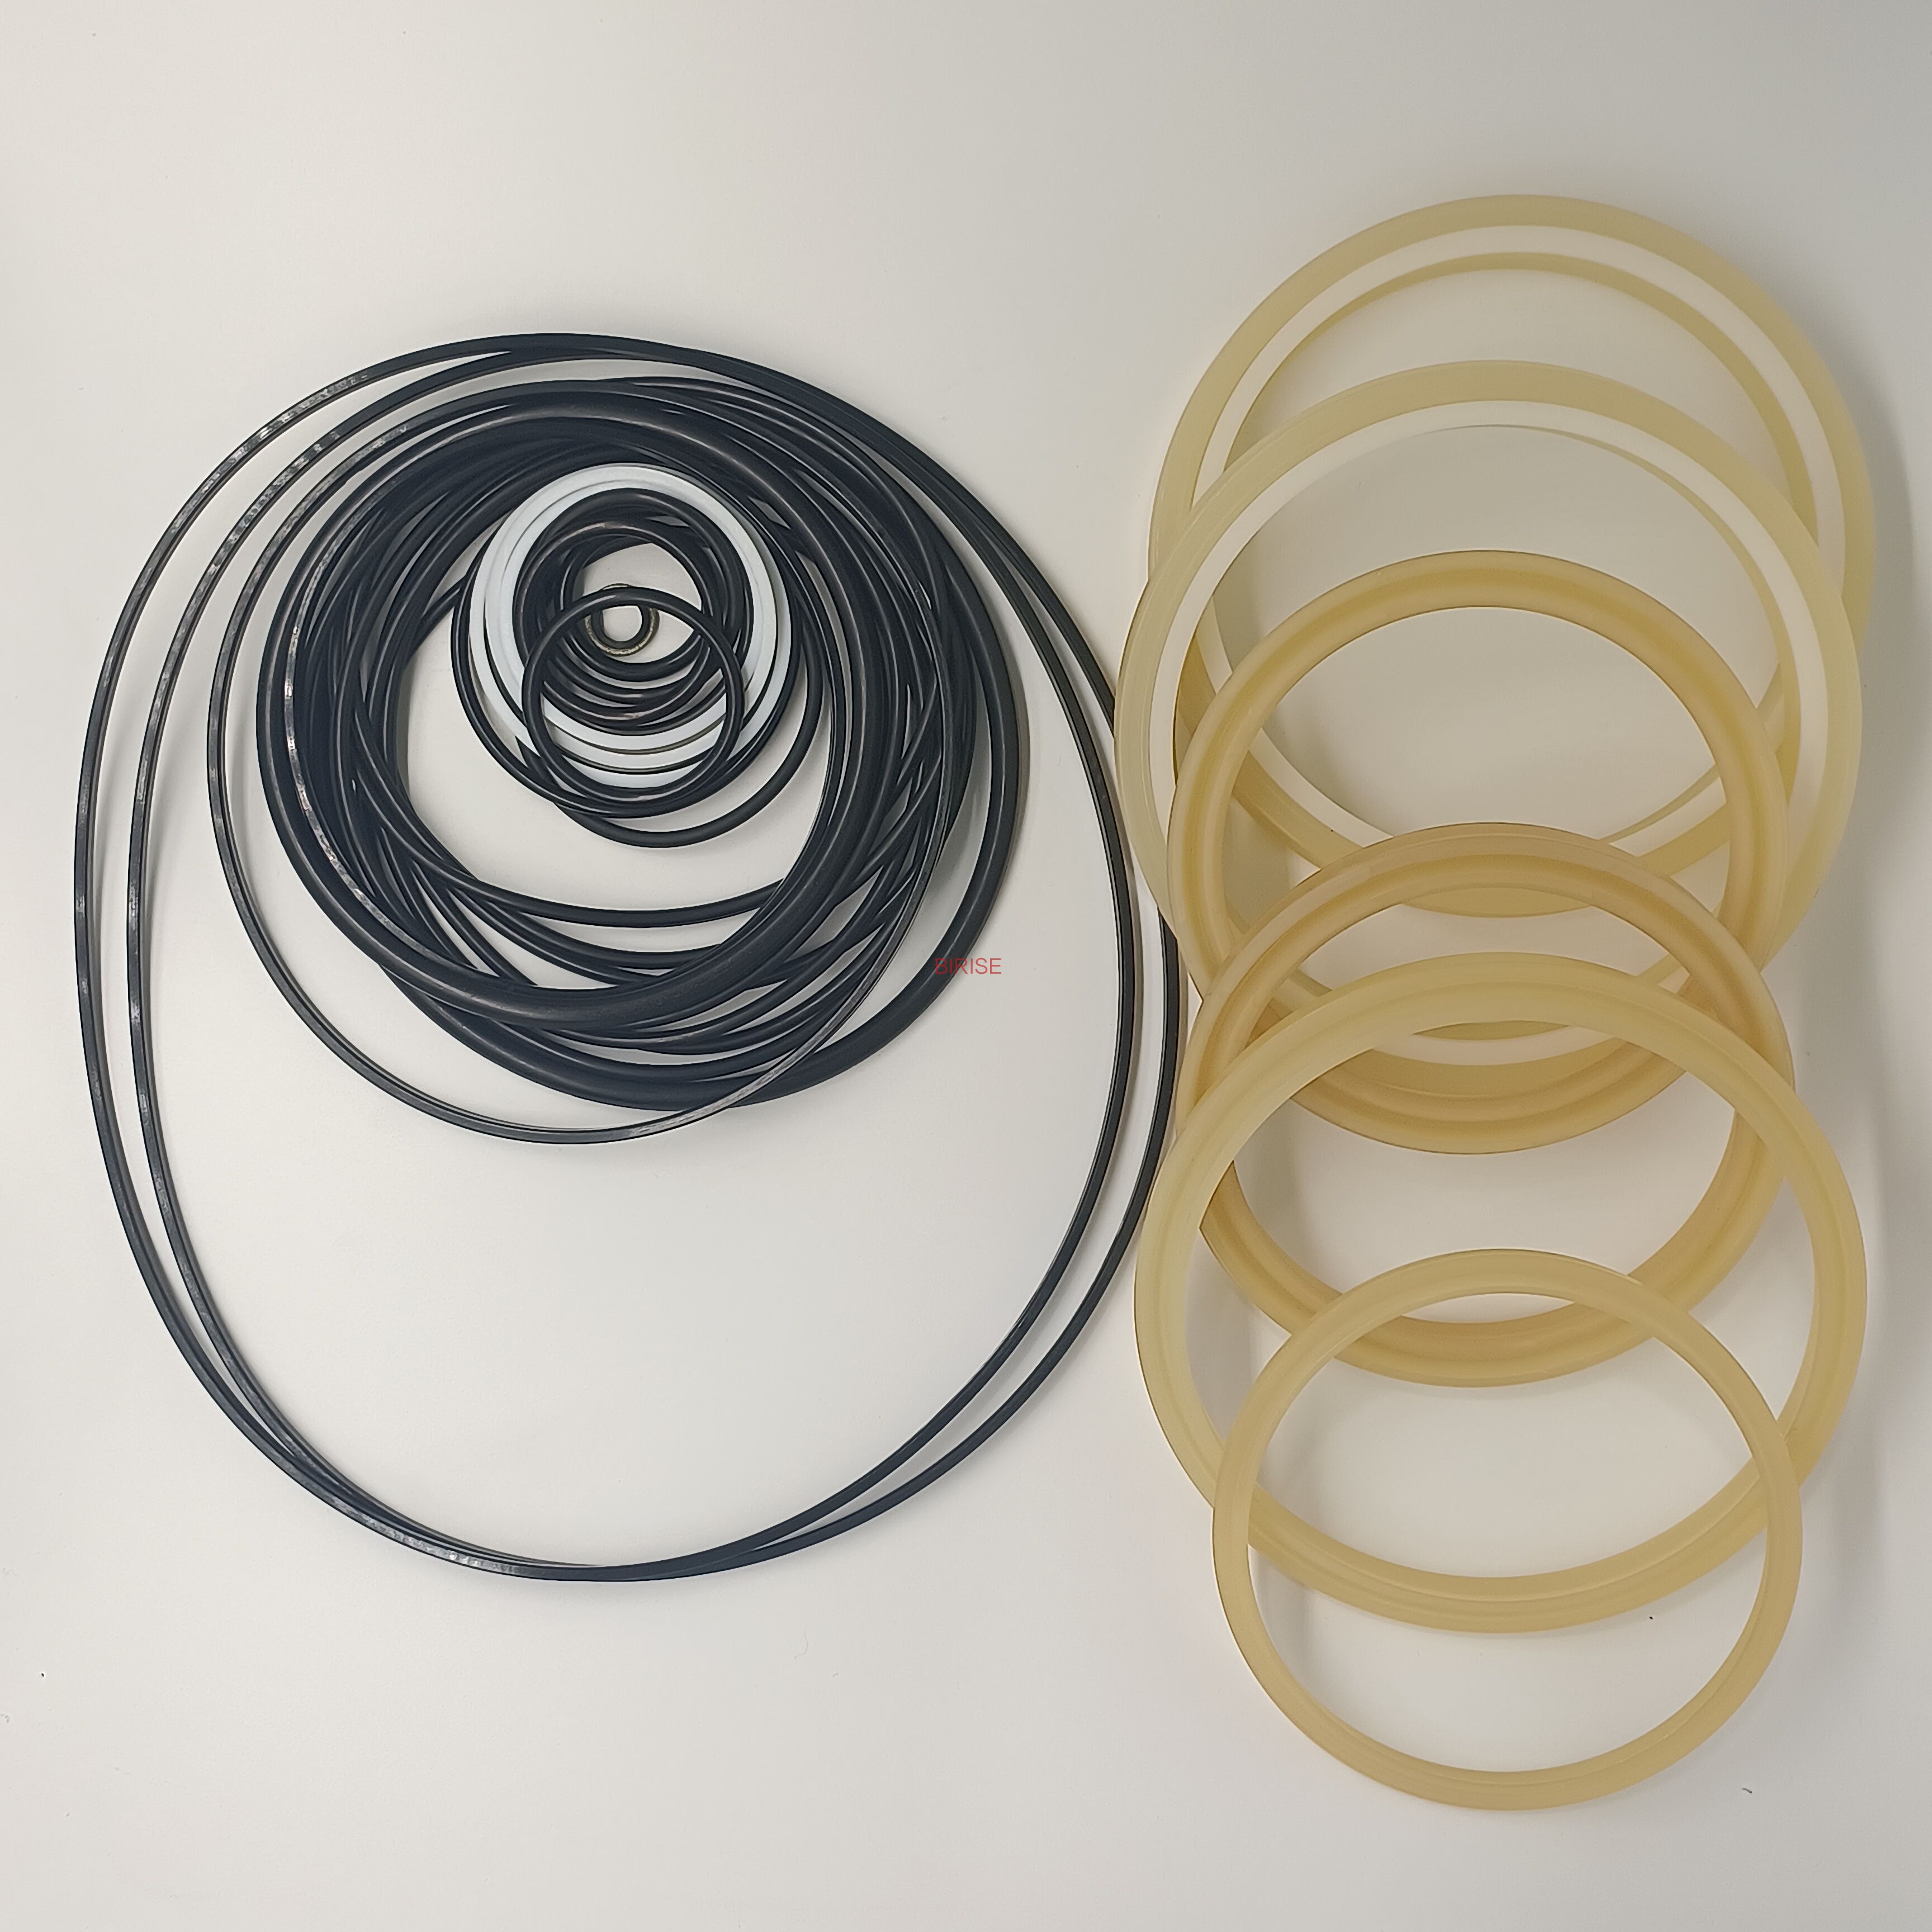 High-Quality Hydraulic Breaker Seal Kits for Efficient Component Maintenance